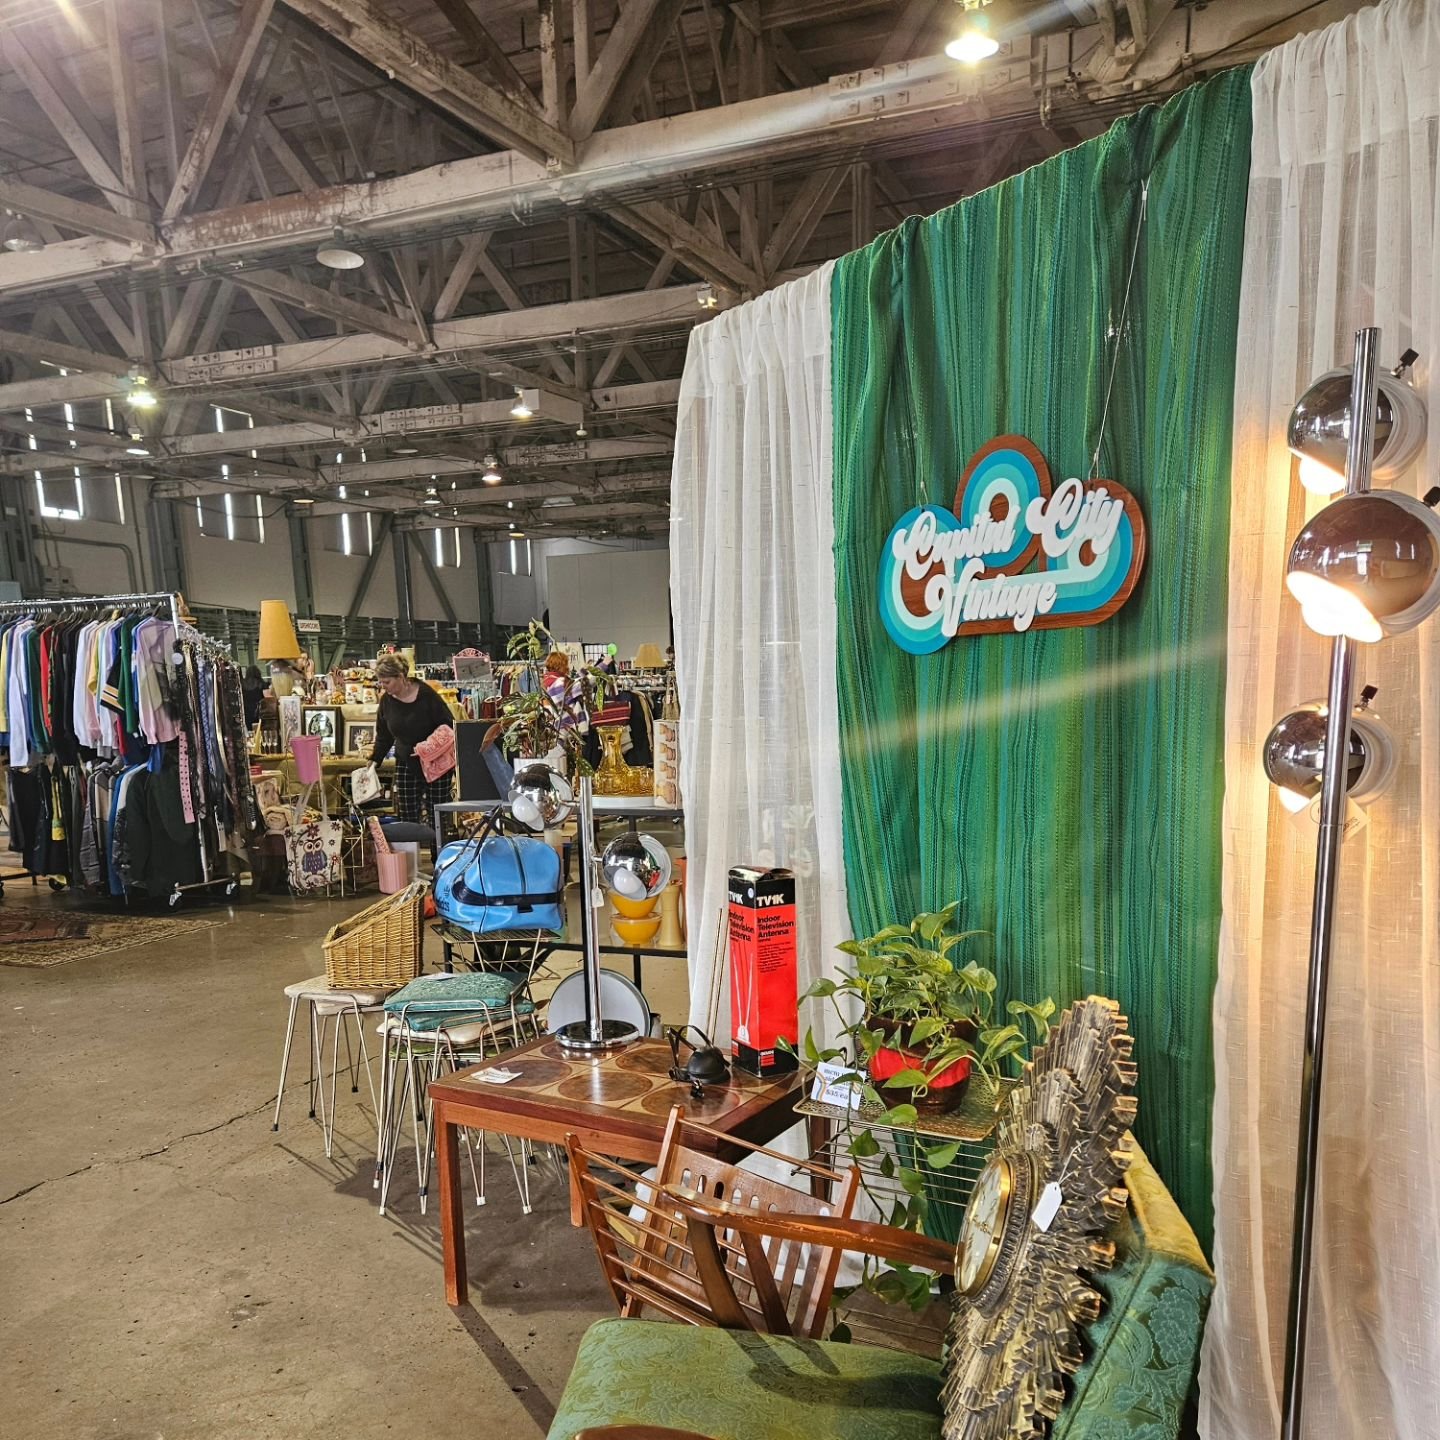 Join us April 26 &amp; 27

11410 Kingsway Ave 
Alberta Aviation Museum Hanger
Friday 3-9
Saturday 9-6
 
You will find a wide variety of vintage - new and second hand goodies. Our market focuses on Vintage (1950-2000) clothing, accessories, household,